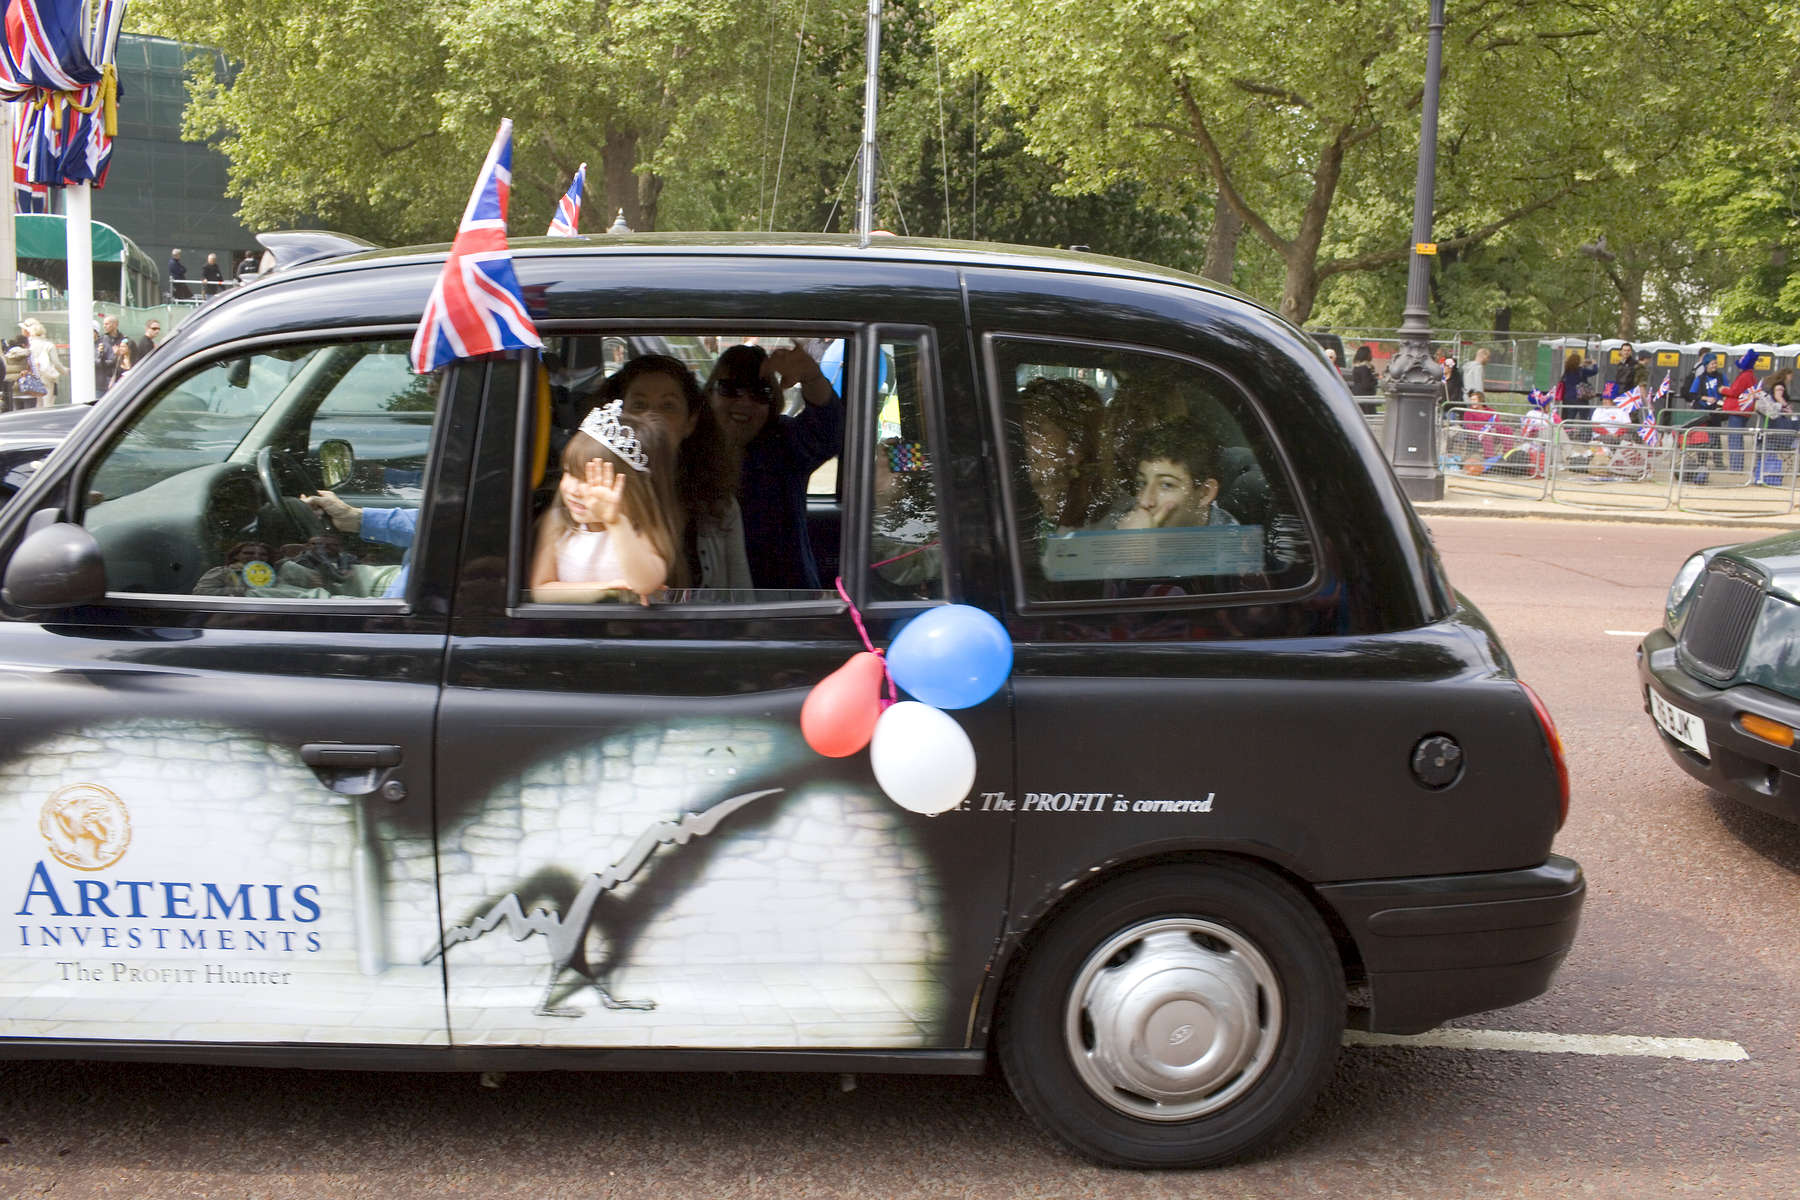 A young girl wearing a tiara waves from a black London taxi on the Mall heading towards Buckingham Palace.